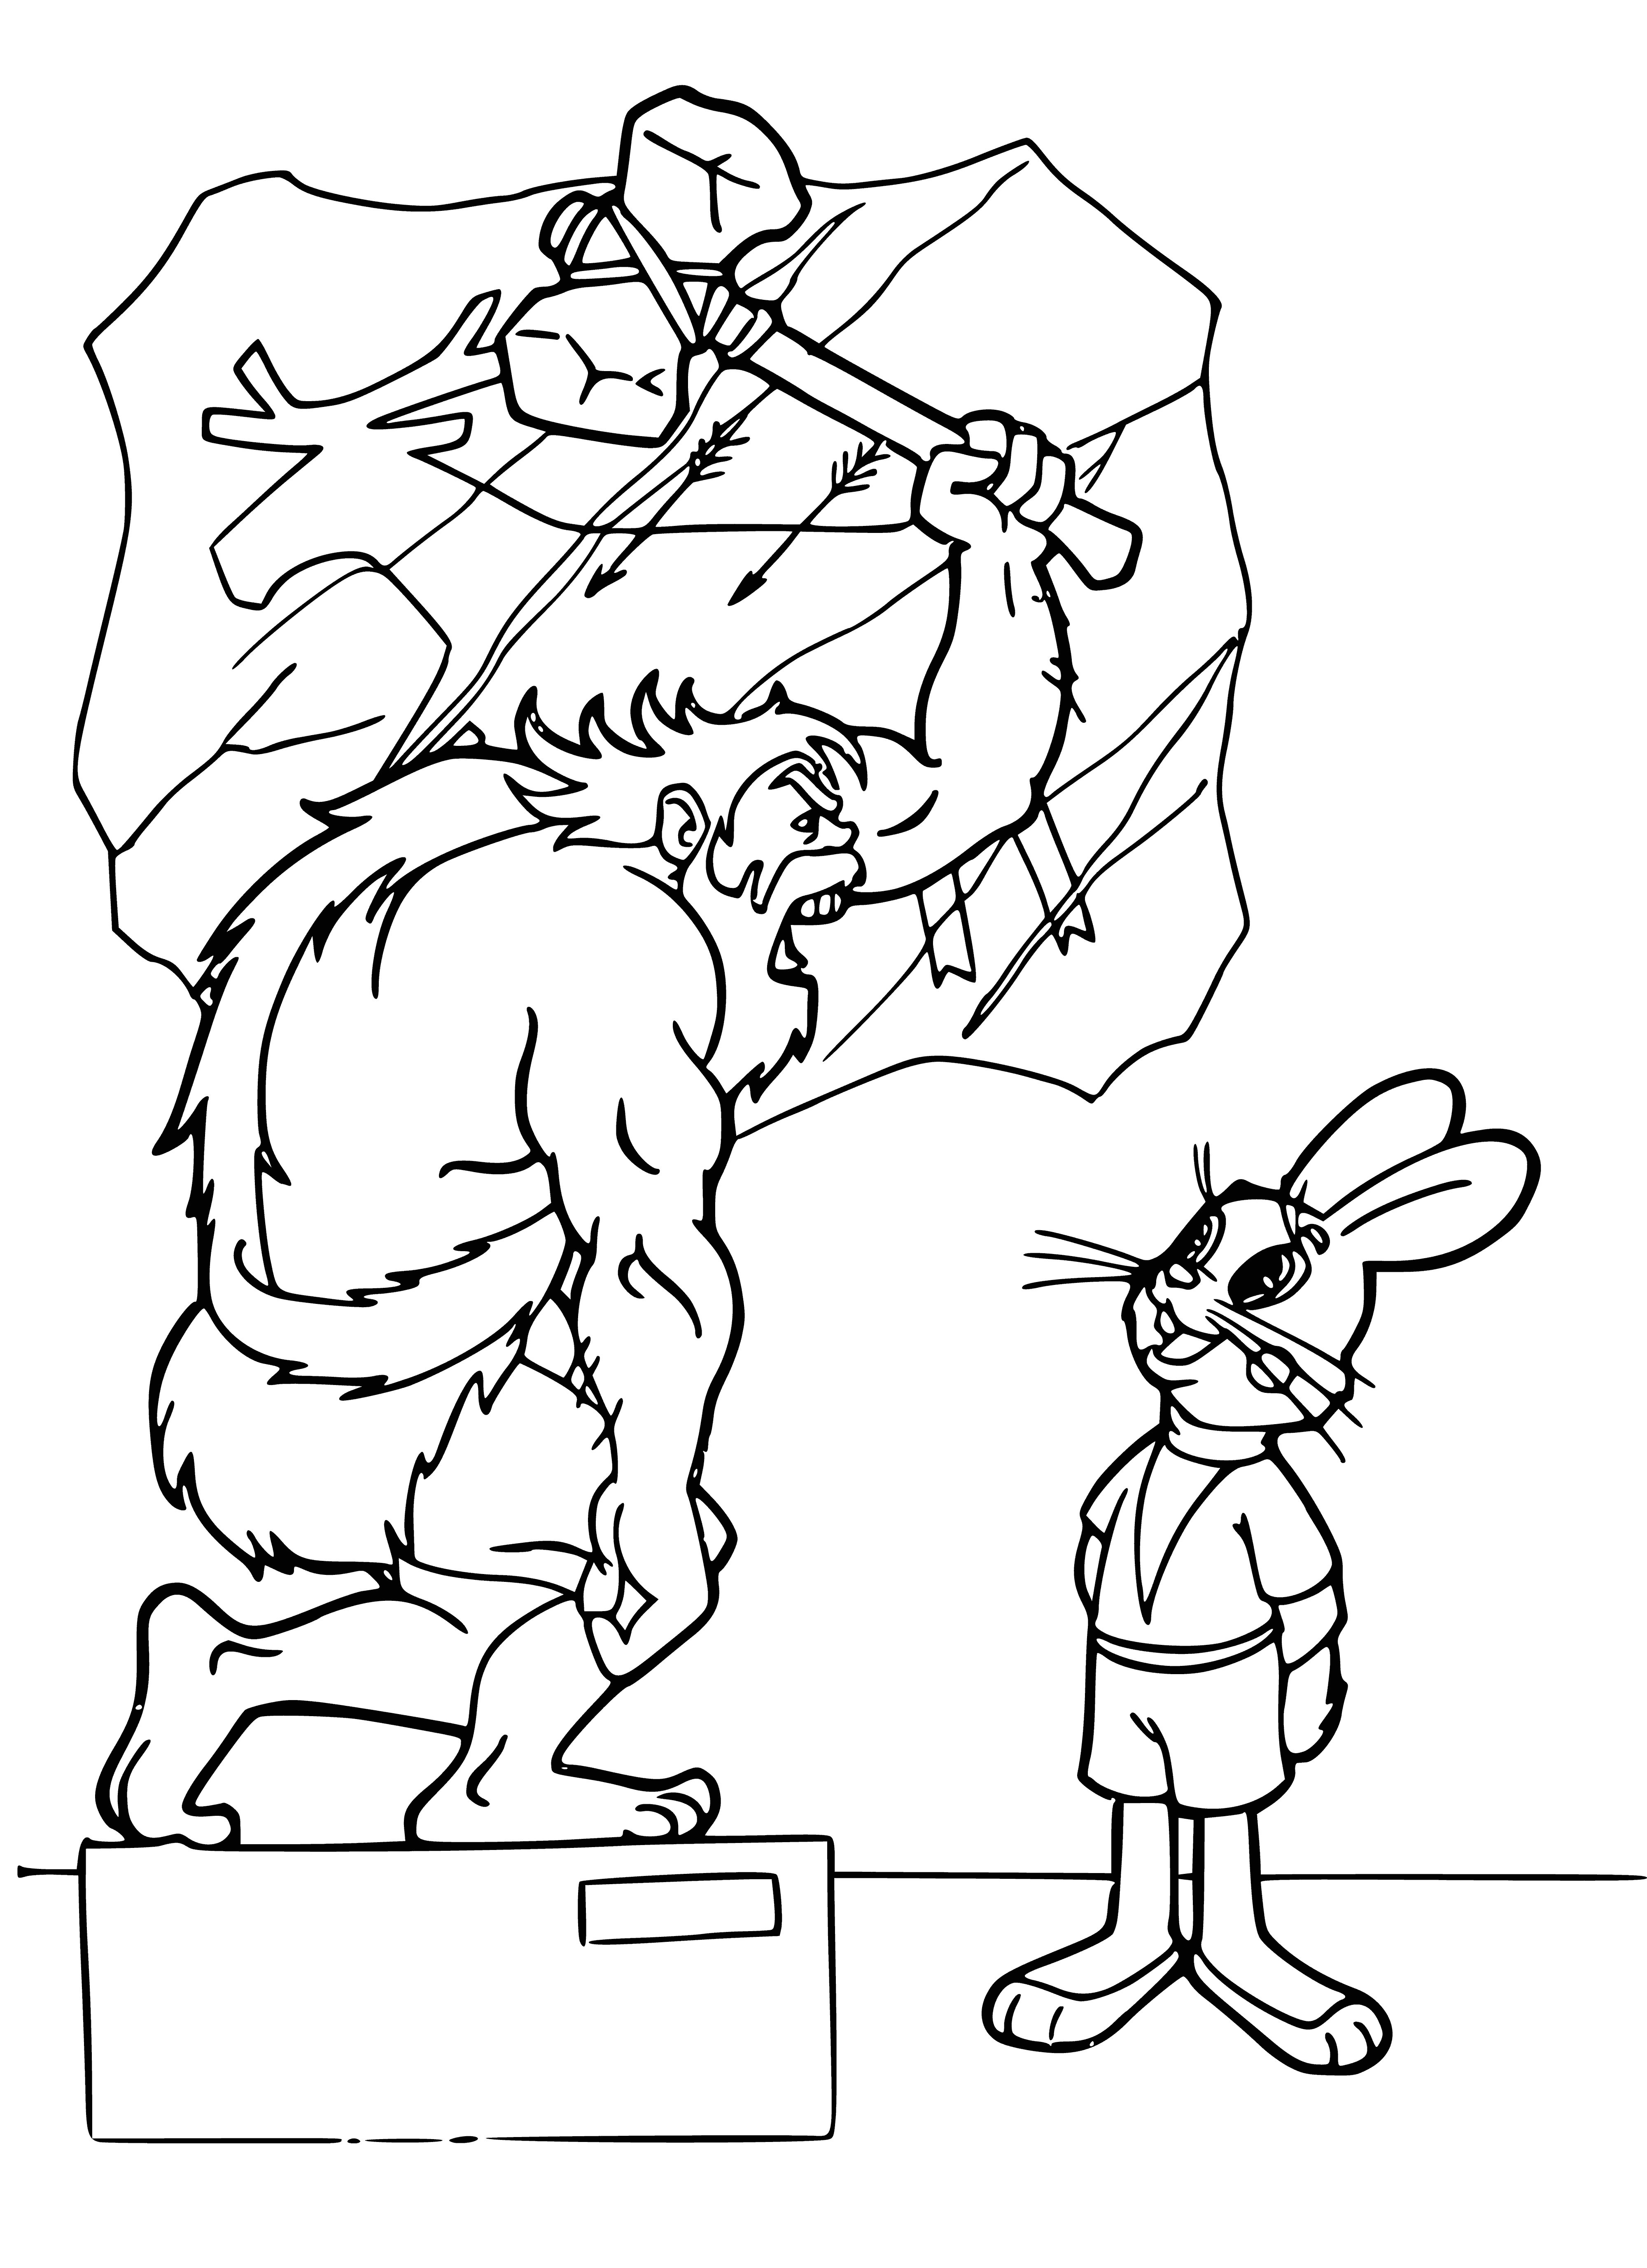 coloring page: Two museum-goers lean in to get a closer look at the painting on the wall.